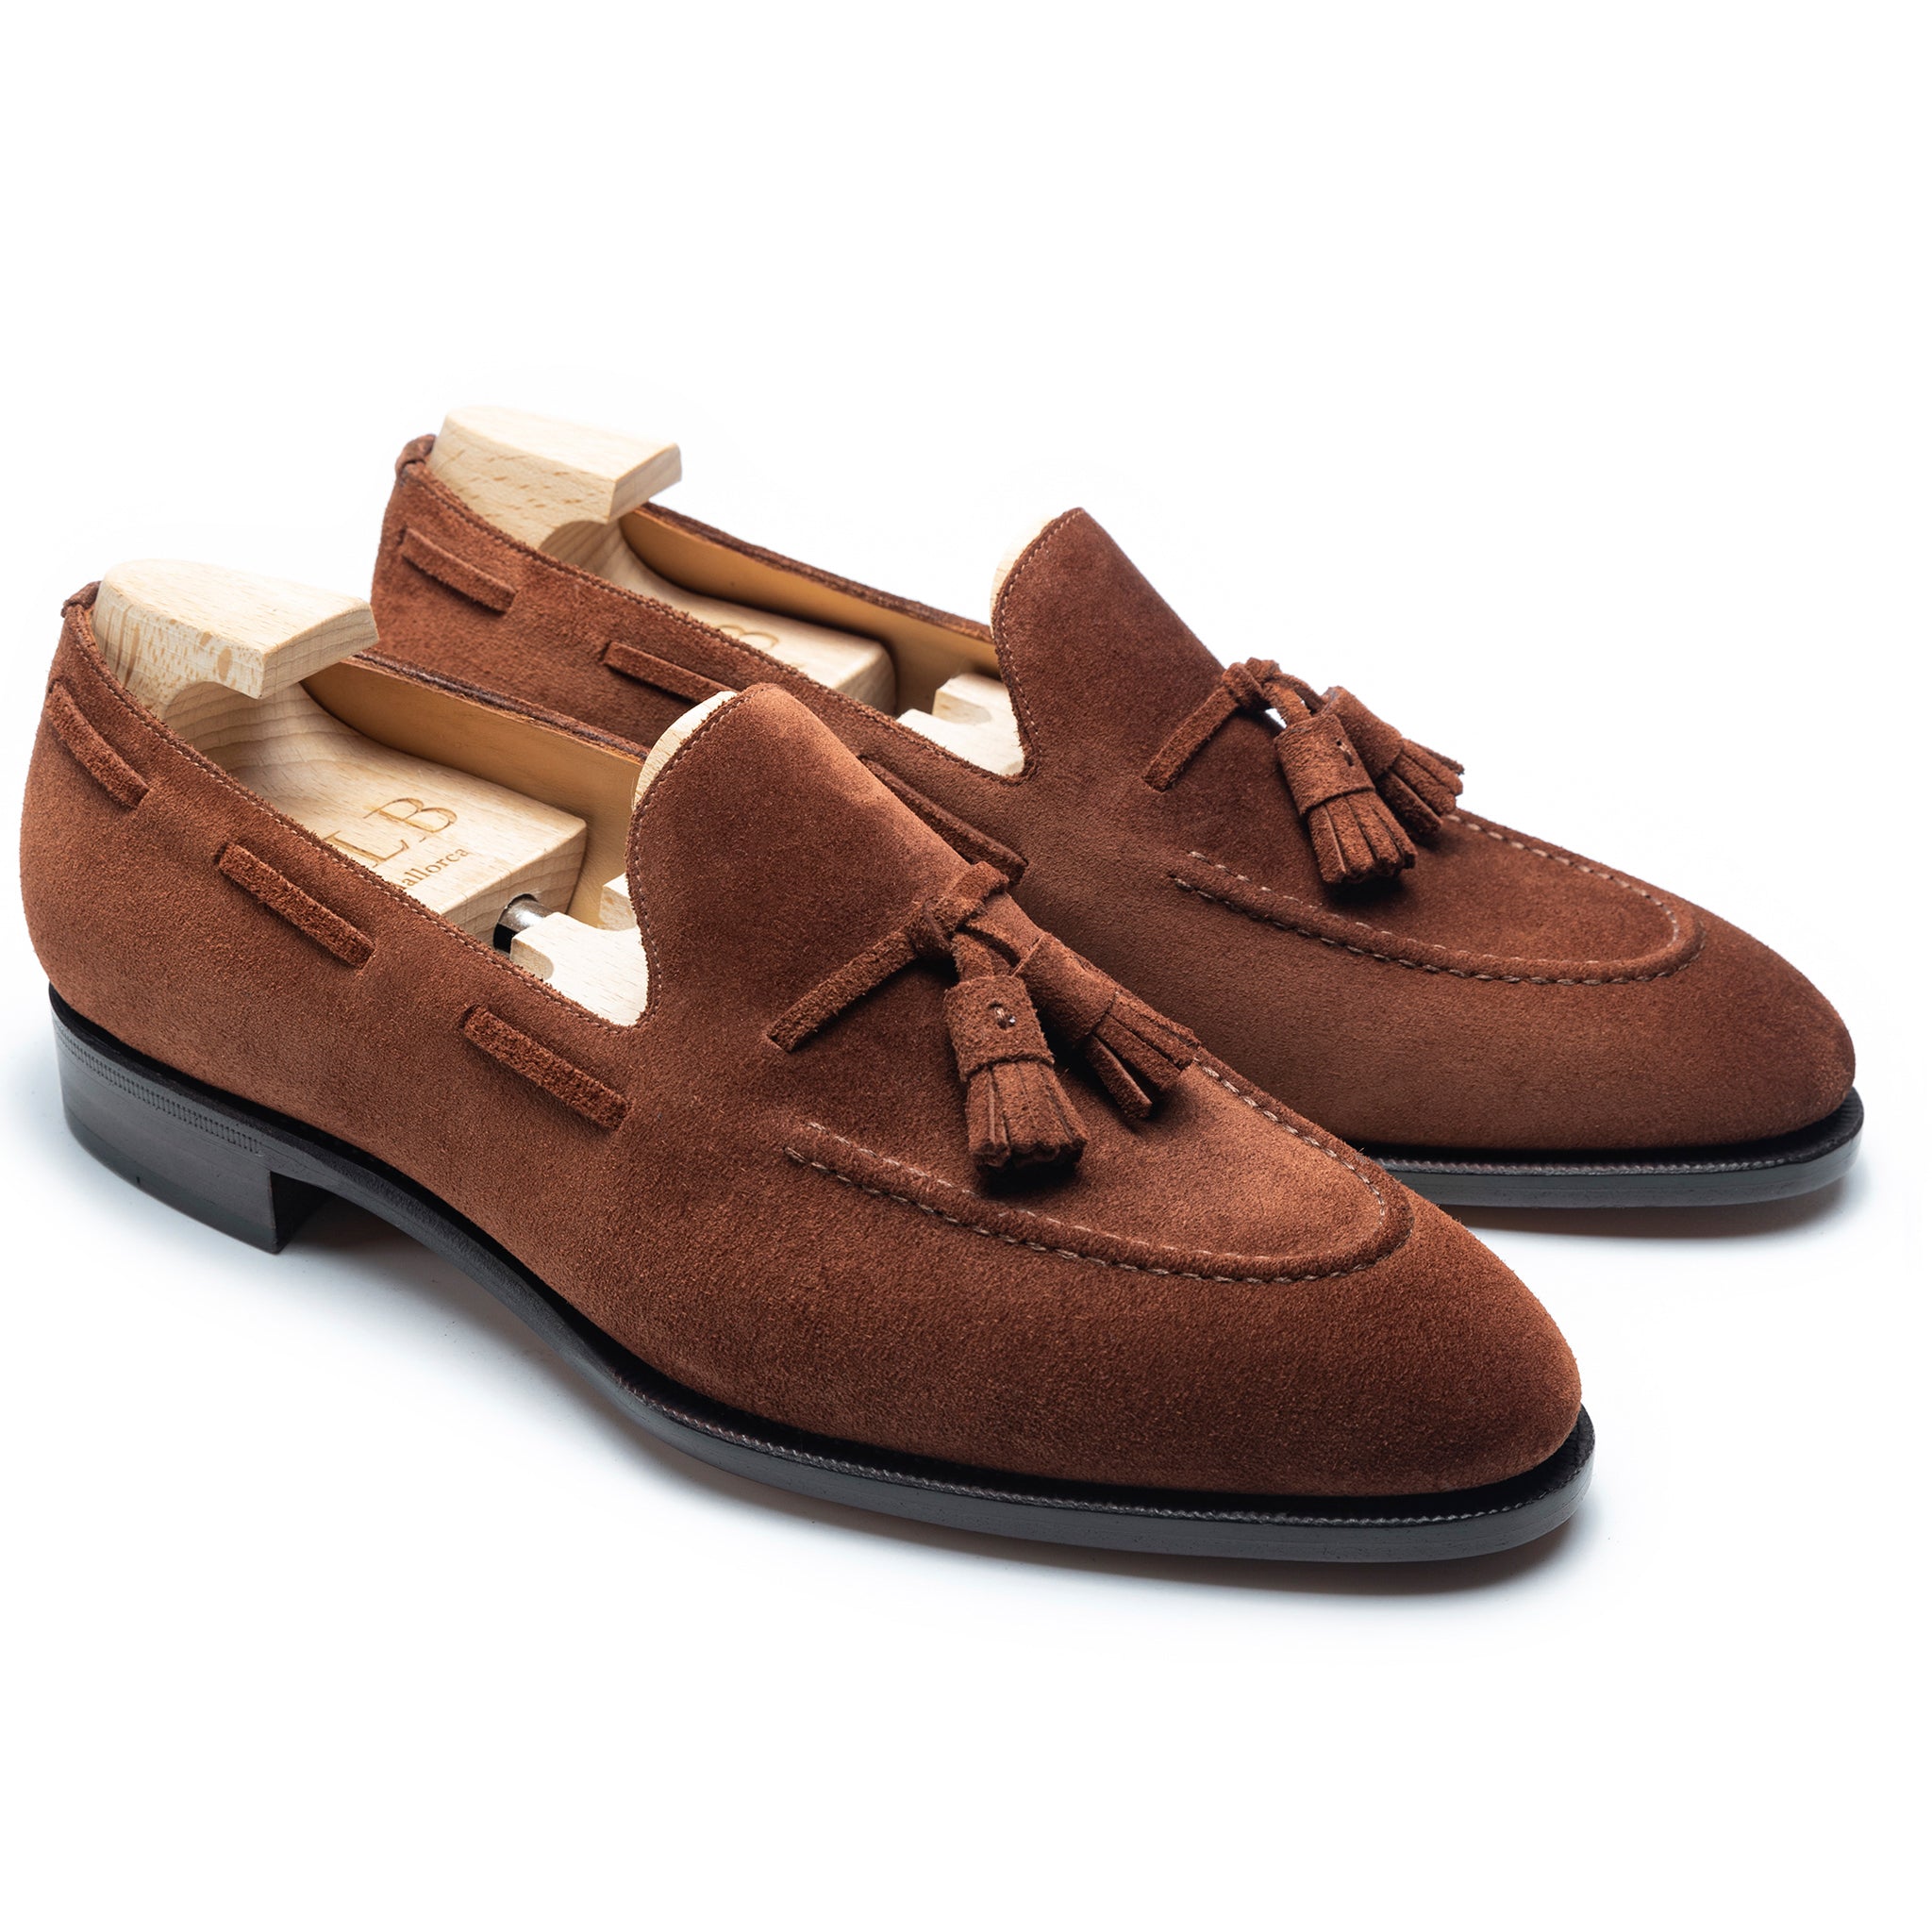 TLB Mallorca | Men's Leather loafers | Men's leather shoes | Goya suede ...